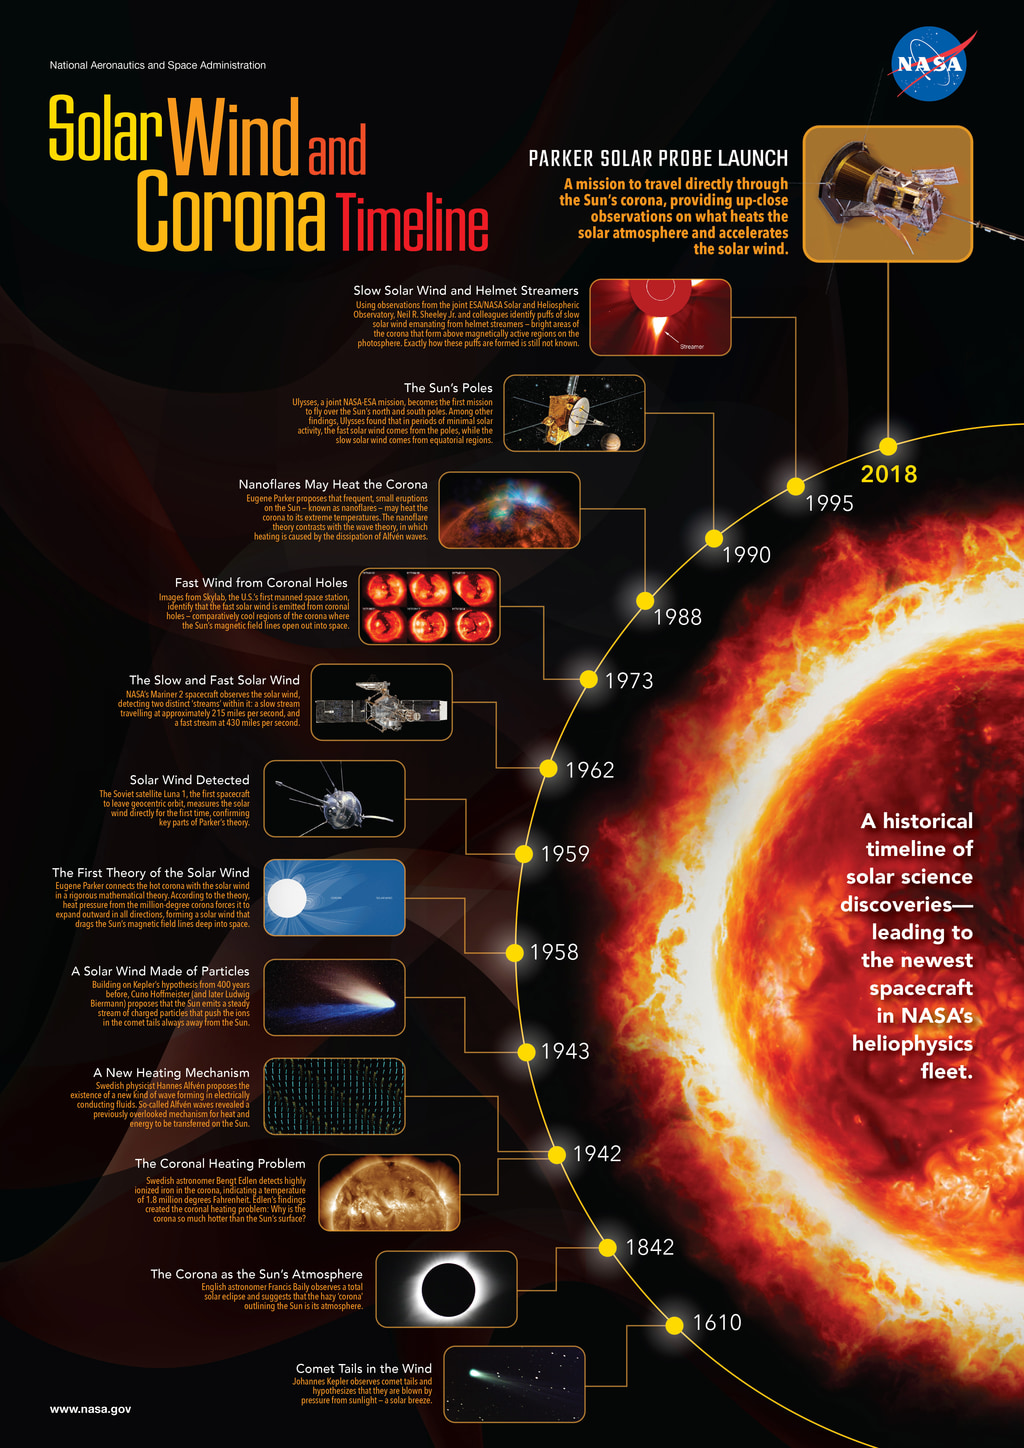 A timeline of science of the solar wind and corona.